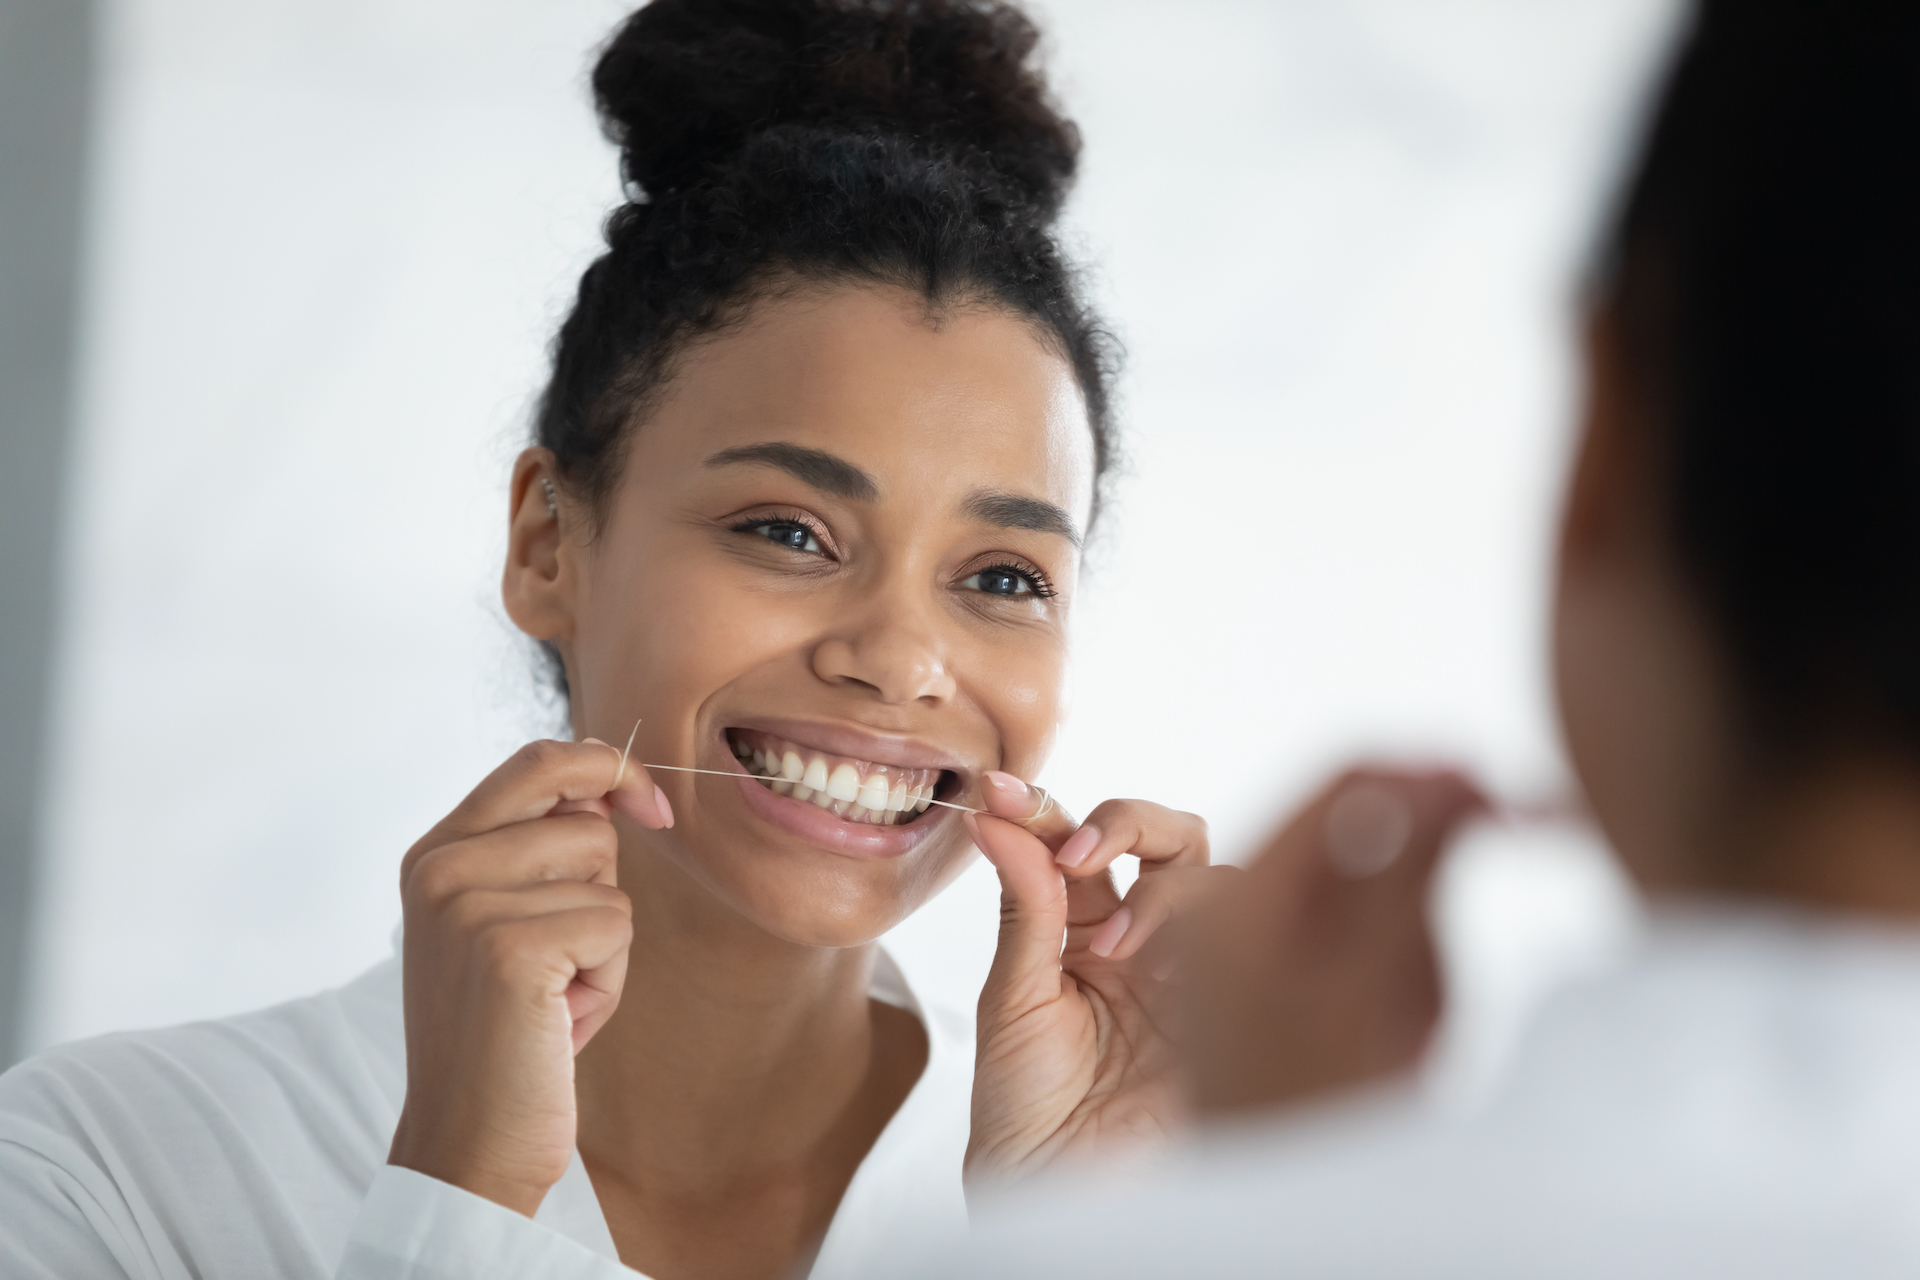 Is Flossing Good For Your Teeth?